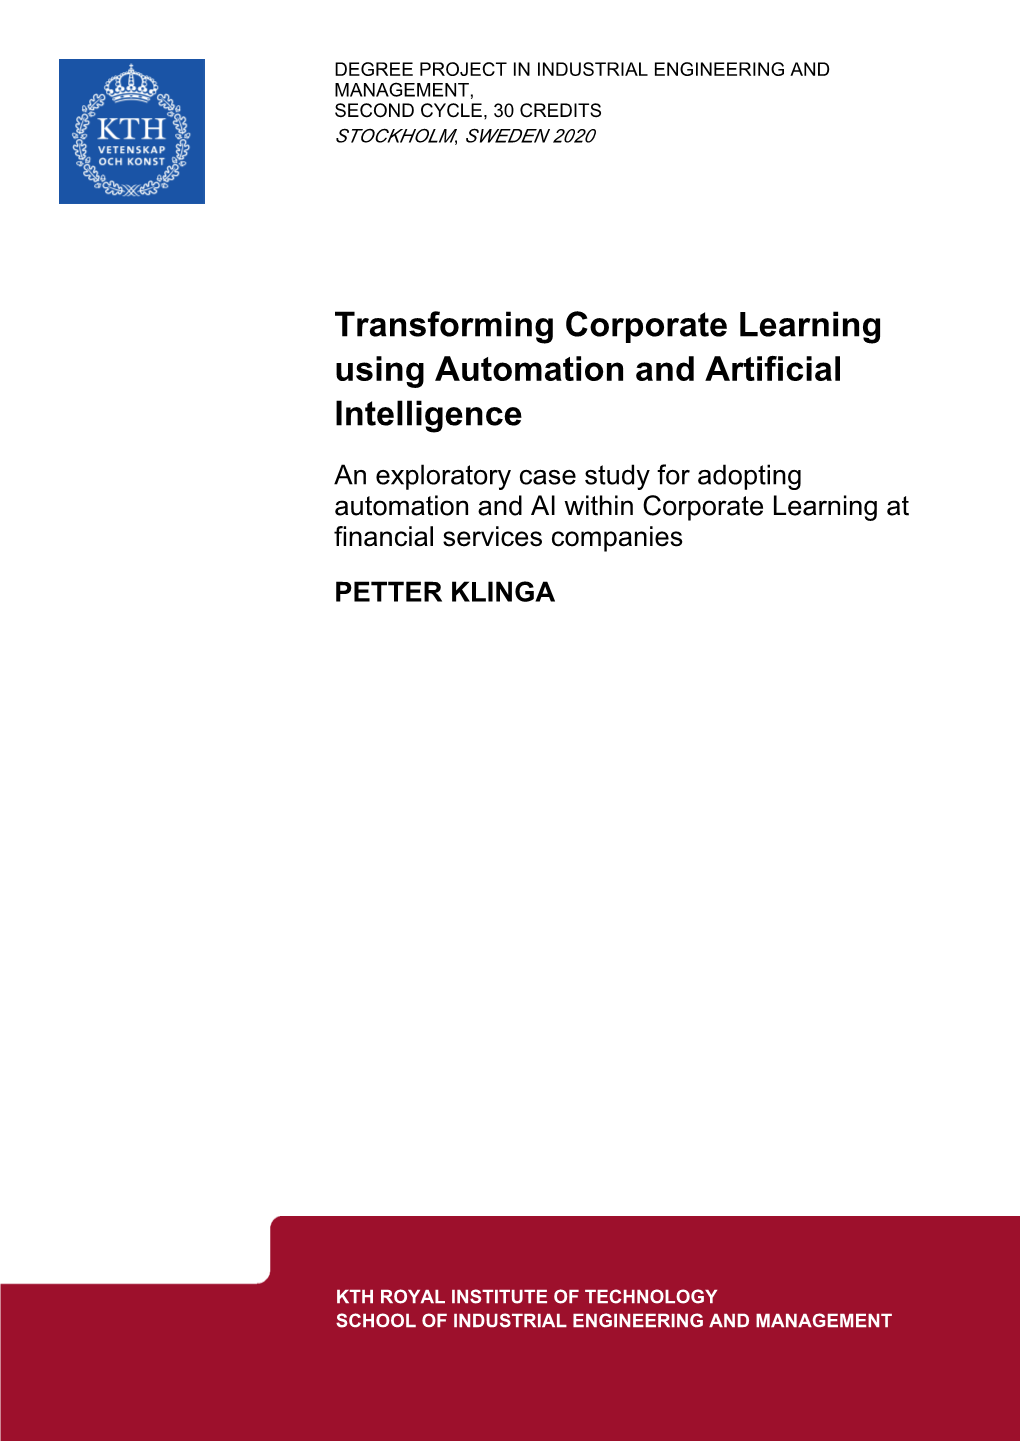 Transforming Corporate Learning Using Automation and Artificial Intelligence